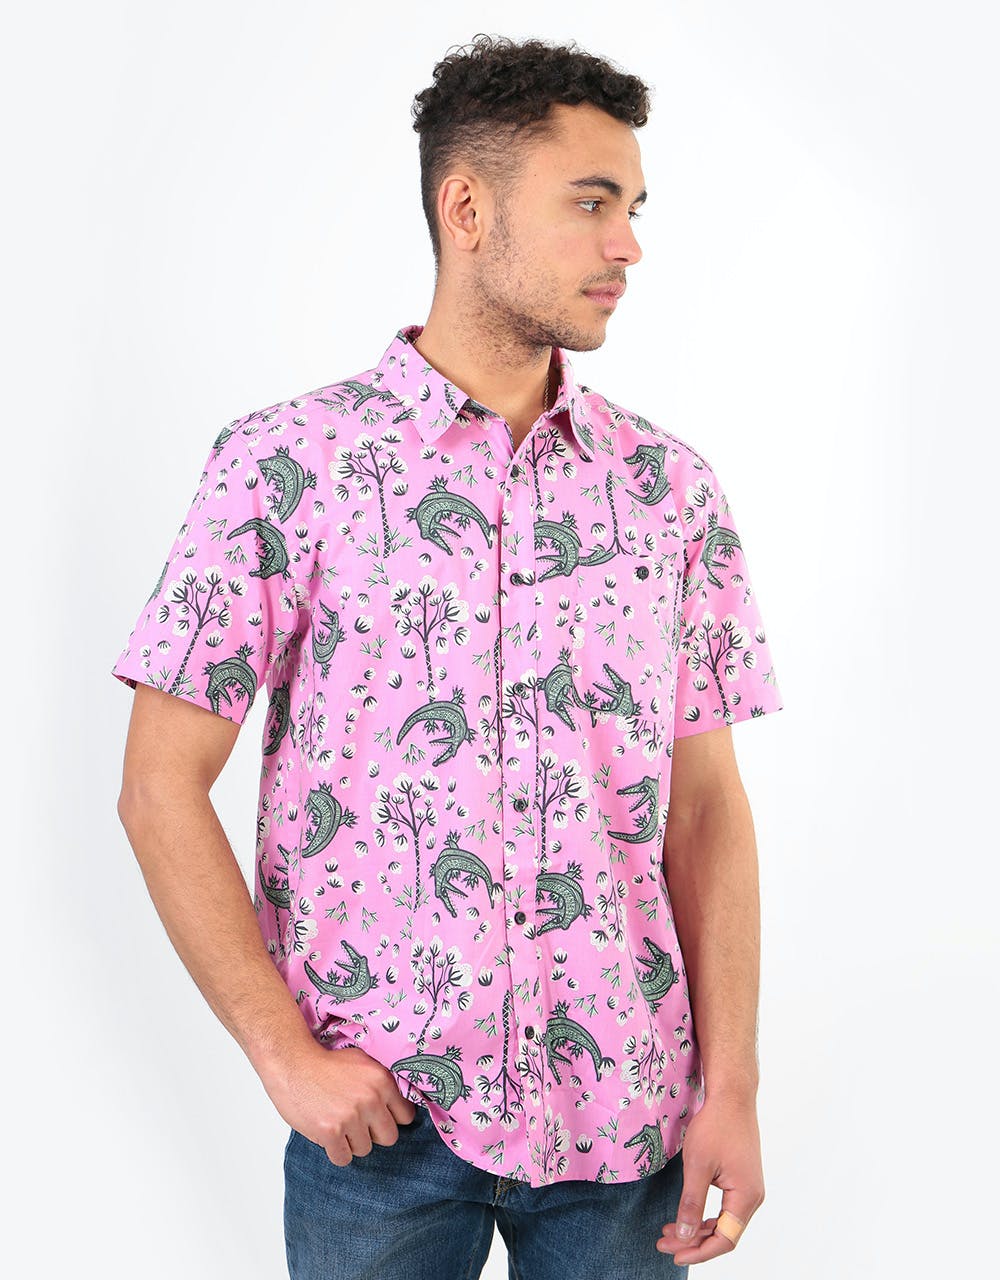 Patagonia Go To S/S Shirt - Cotton Ball Gators:Marble Pink